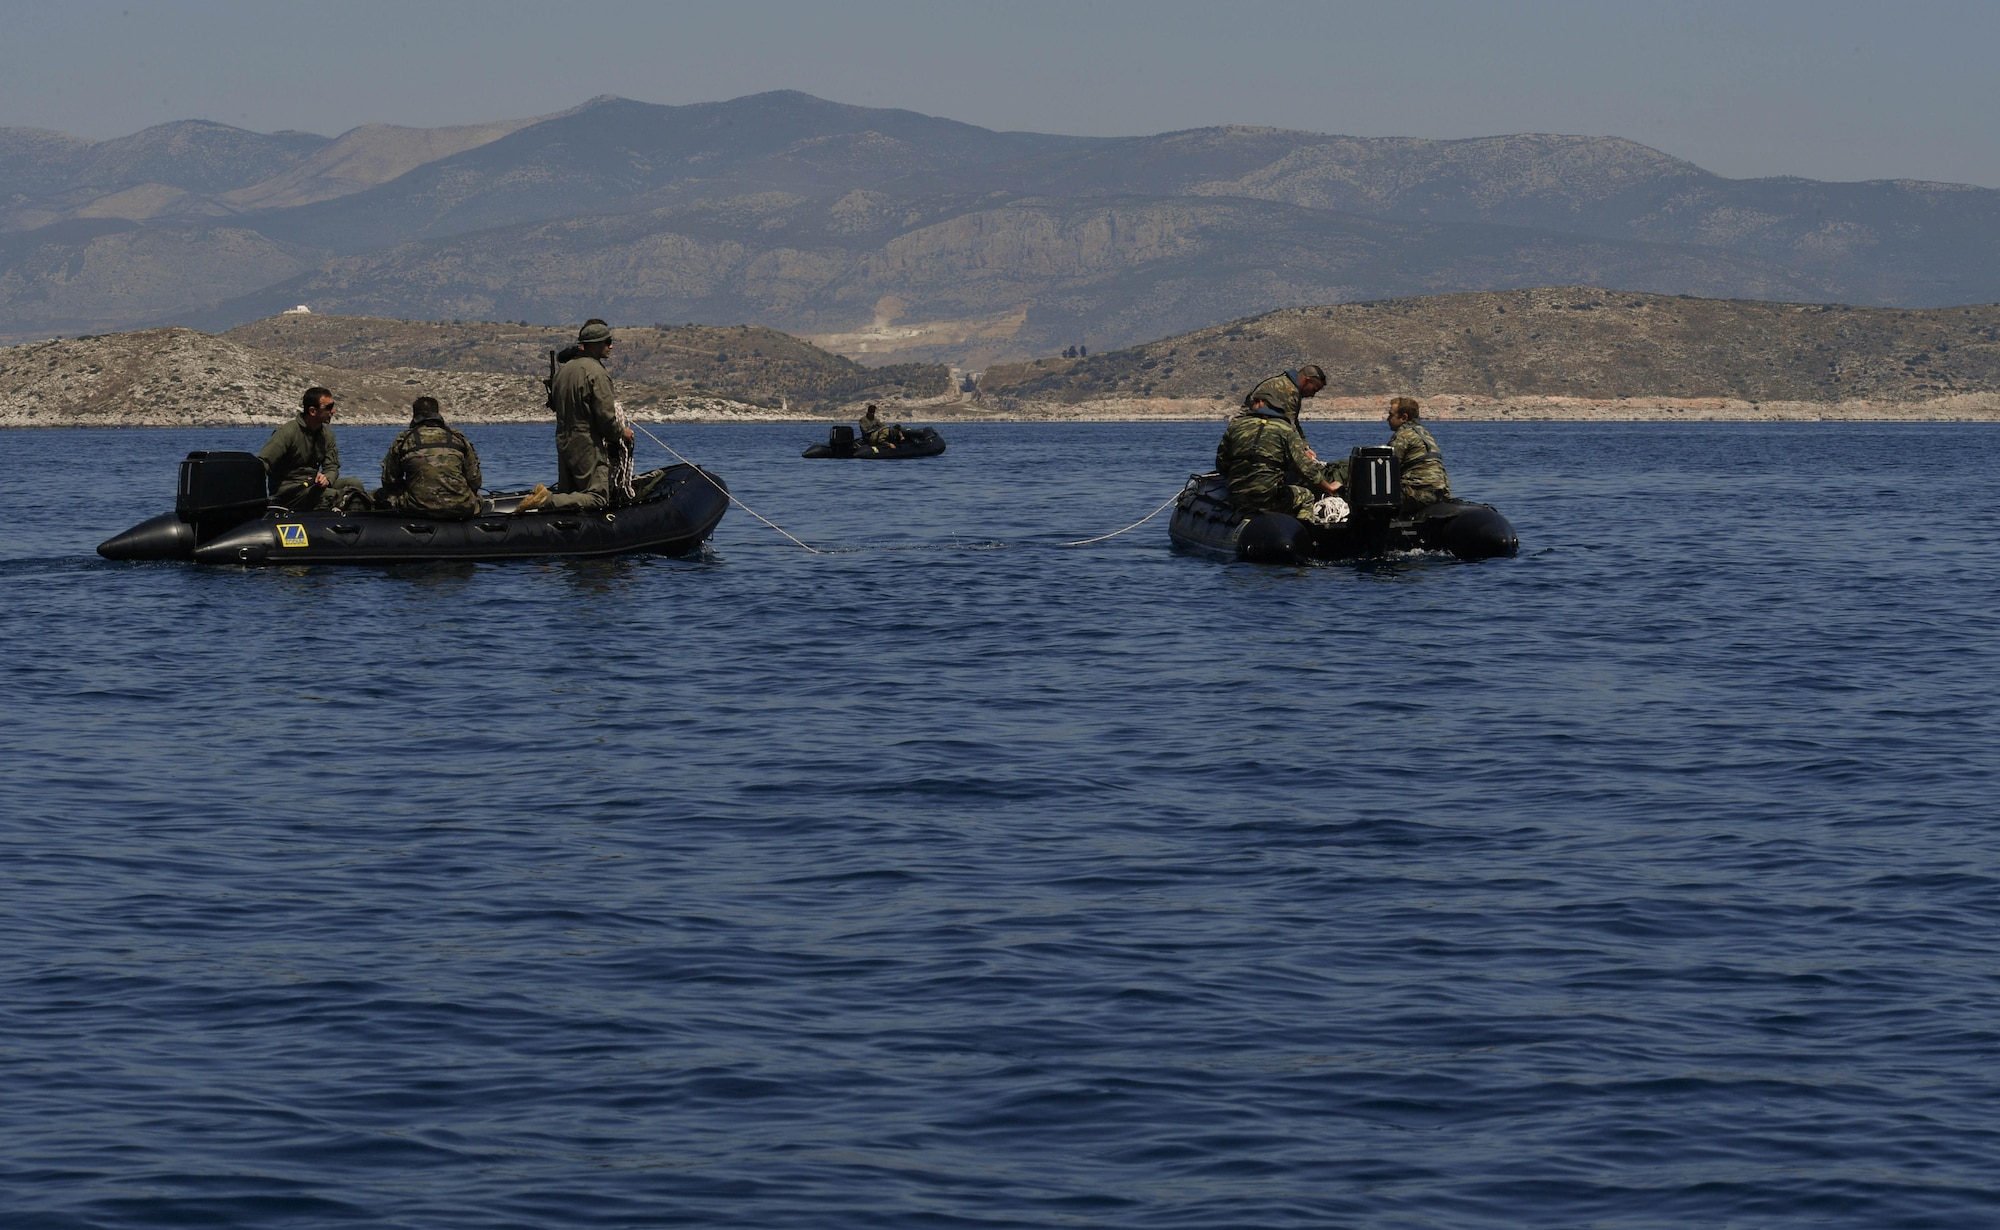 Greek servicemembers gather a sea-rescue kit out of the Mediterranean Sea during Exercise Stolen Cerberus IV near Elefsis Air Base, Greece, April 27, 2017. U.S. Air Force and Army servicemembers trained alongside their Greek partners to conduct these drops for the first time during this fourth iteration of the exercise. As NATO allies, the U.S. and Greece share a commitment to promote peace and stability, and seek opportunities to continue developing their strong relationship. (U.S Air Force photo by Senior Airman Tryphena Mayhugh)